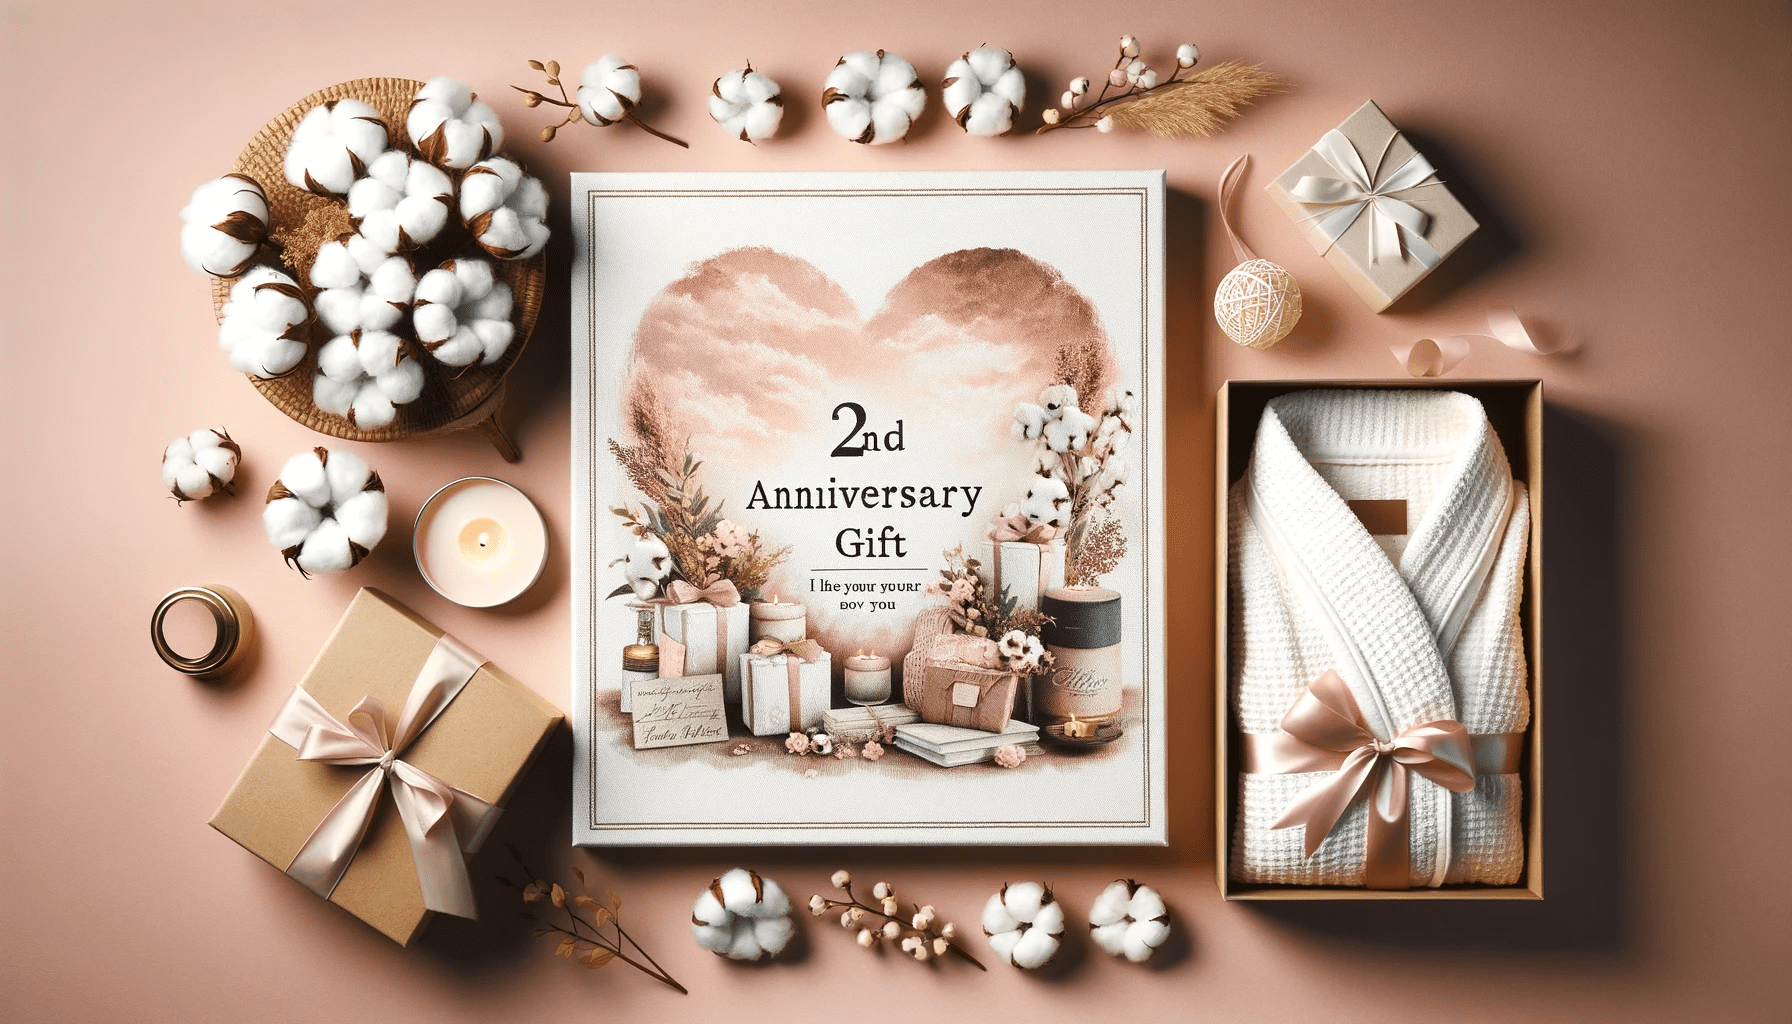 A featured image ideal for a 2nd wedding anniversary gift article. The image should include a collage of cotton-themed gifts, symbolizing the tradition